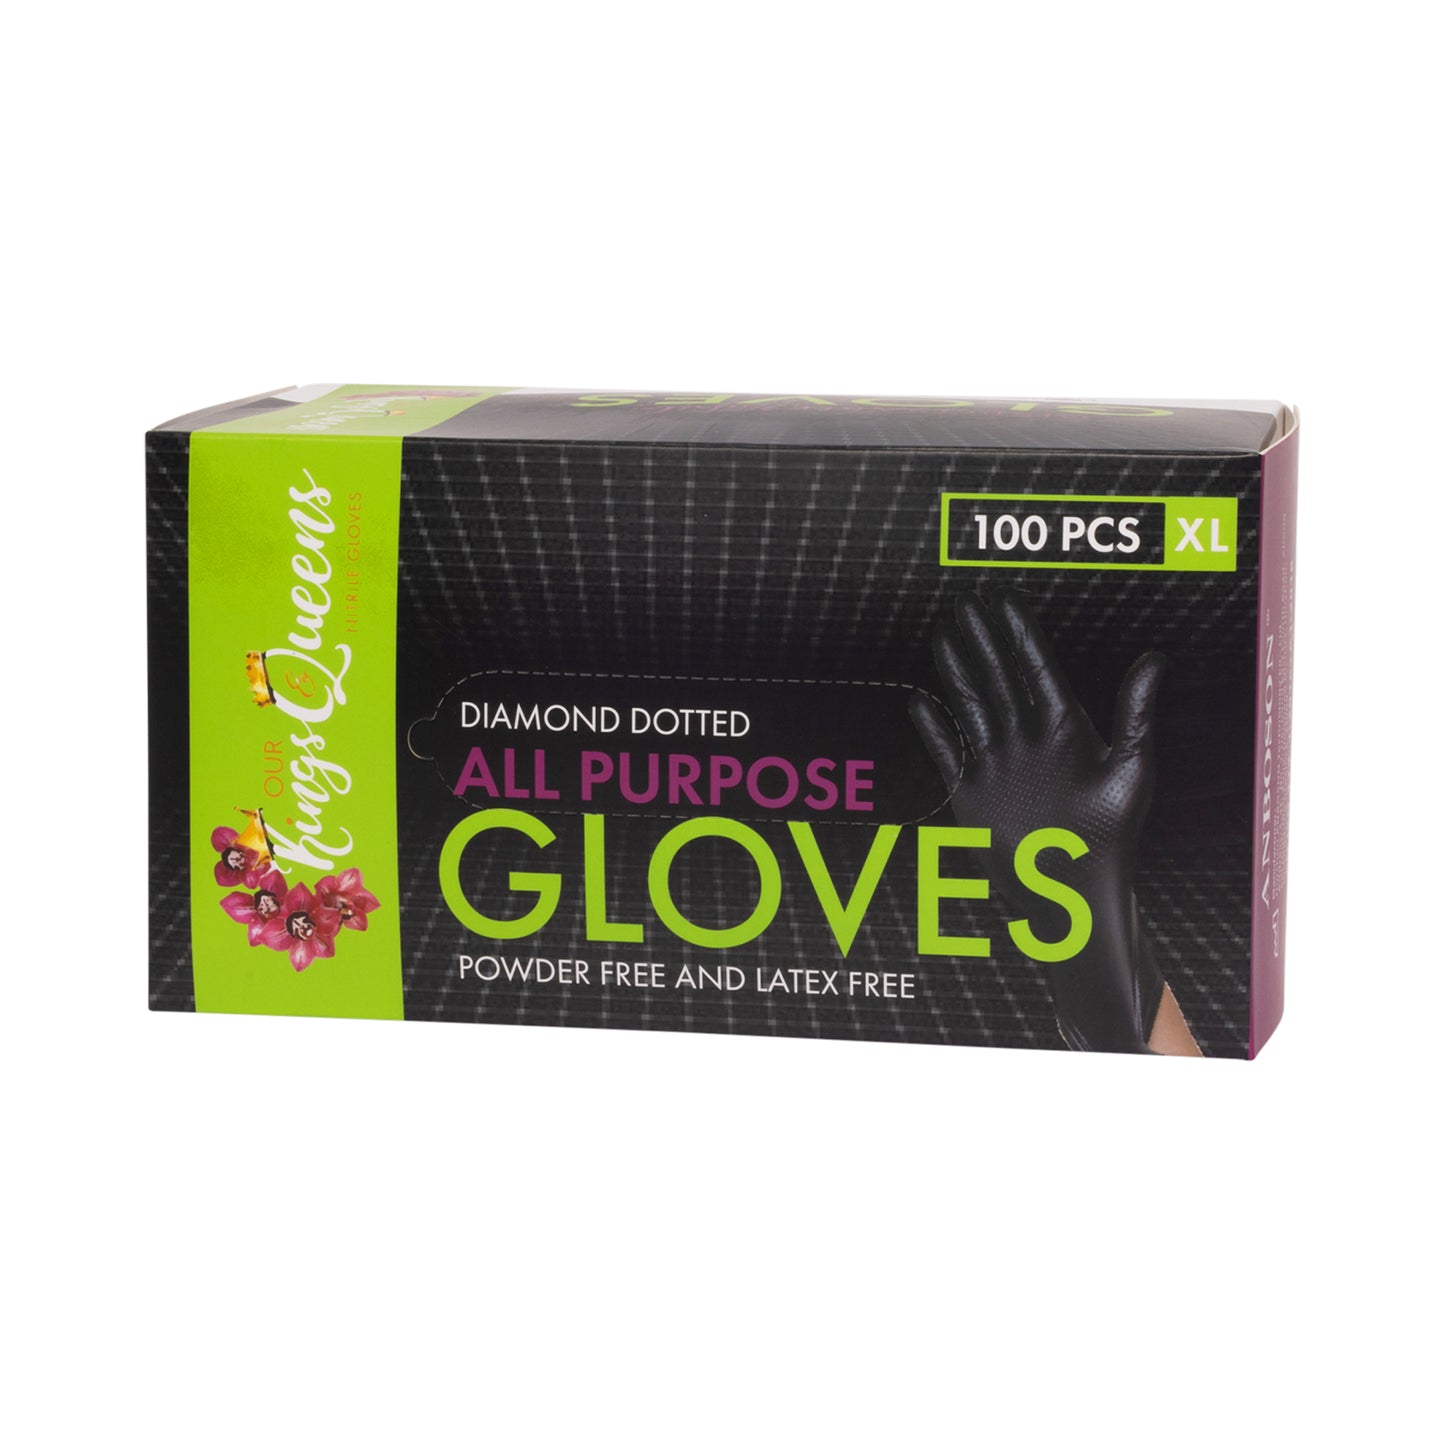 Our Kings and Queens Black XL Nitrile Gloves 1 box